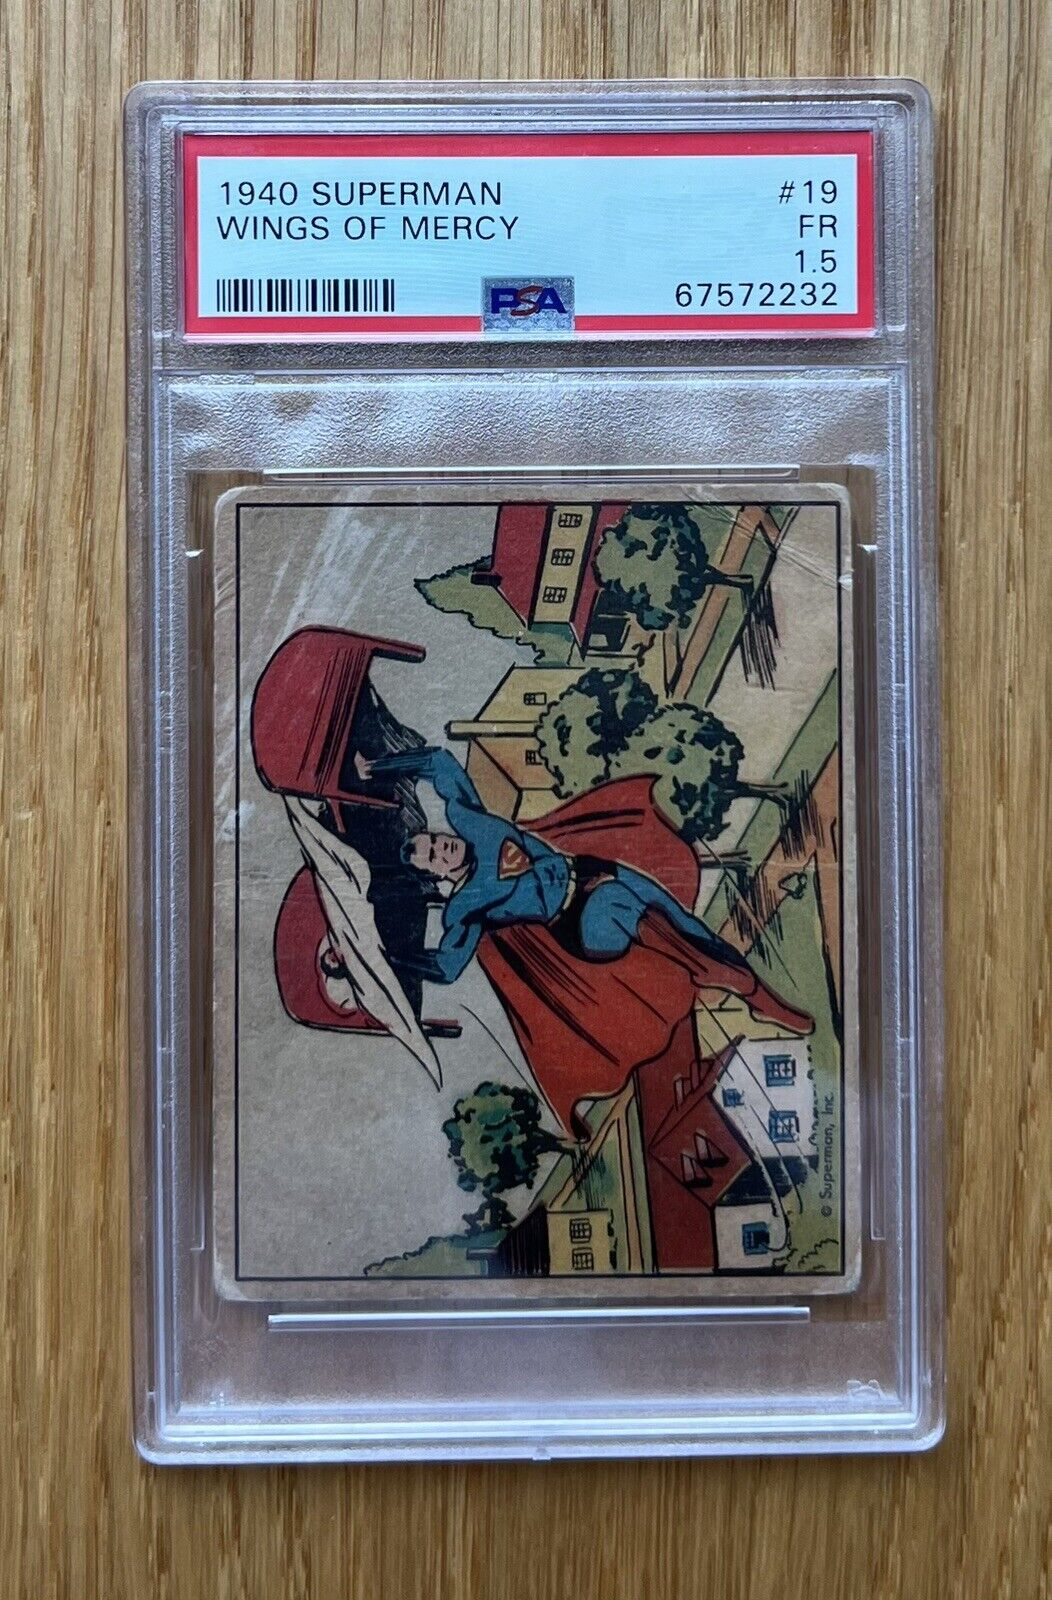 1940 SUPERMAN WINGS OF MERCY #19 PSA 1.5 RARE ISSUE GUM INC. GRADED